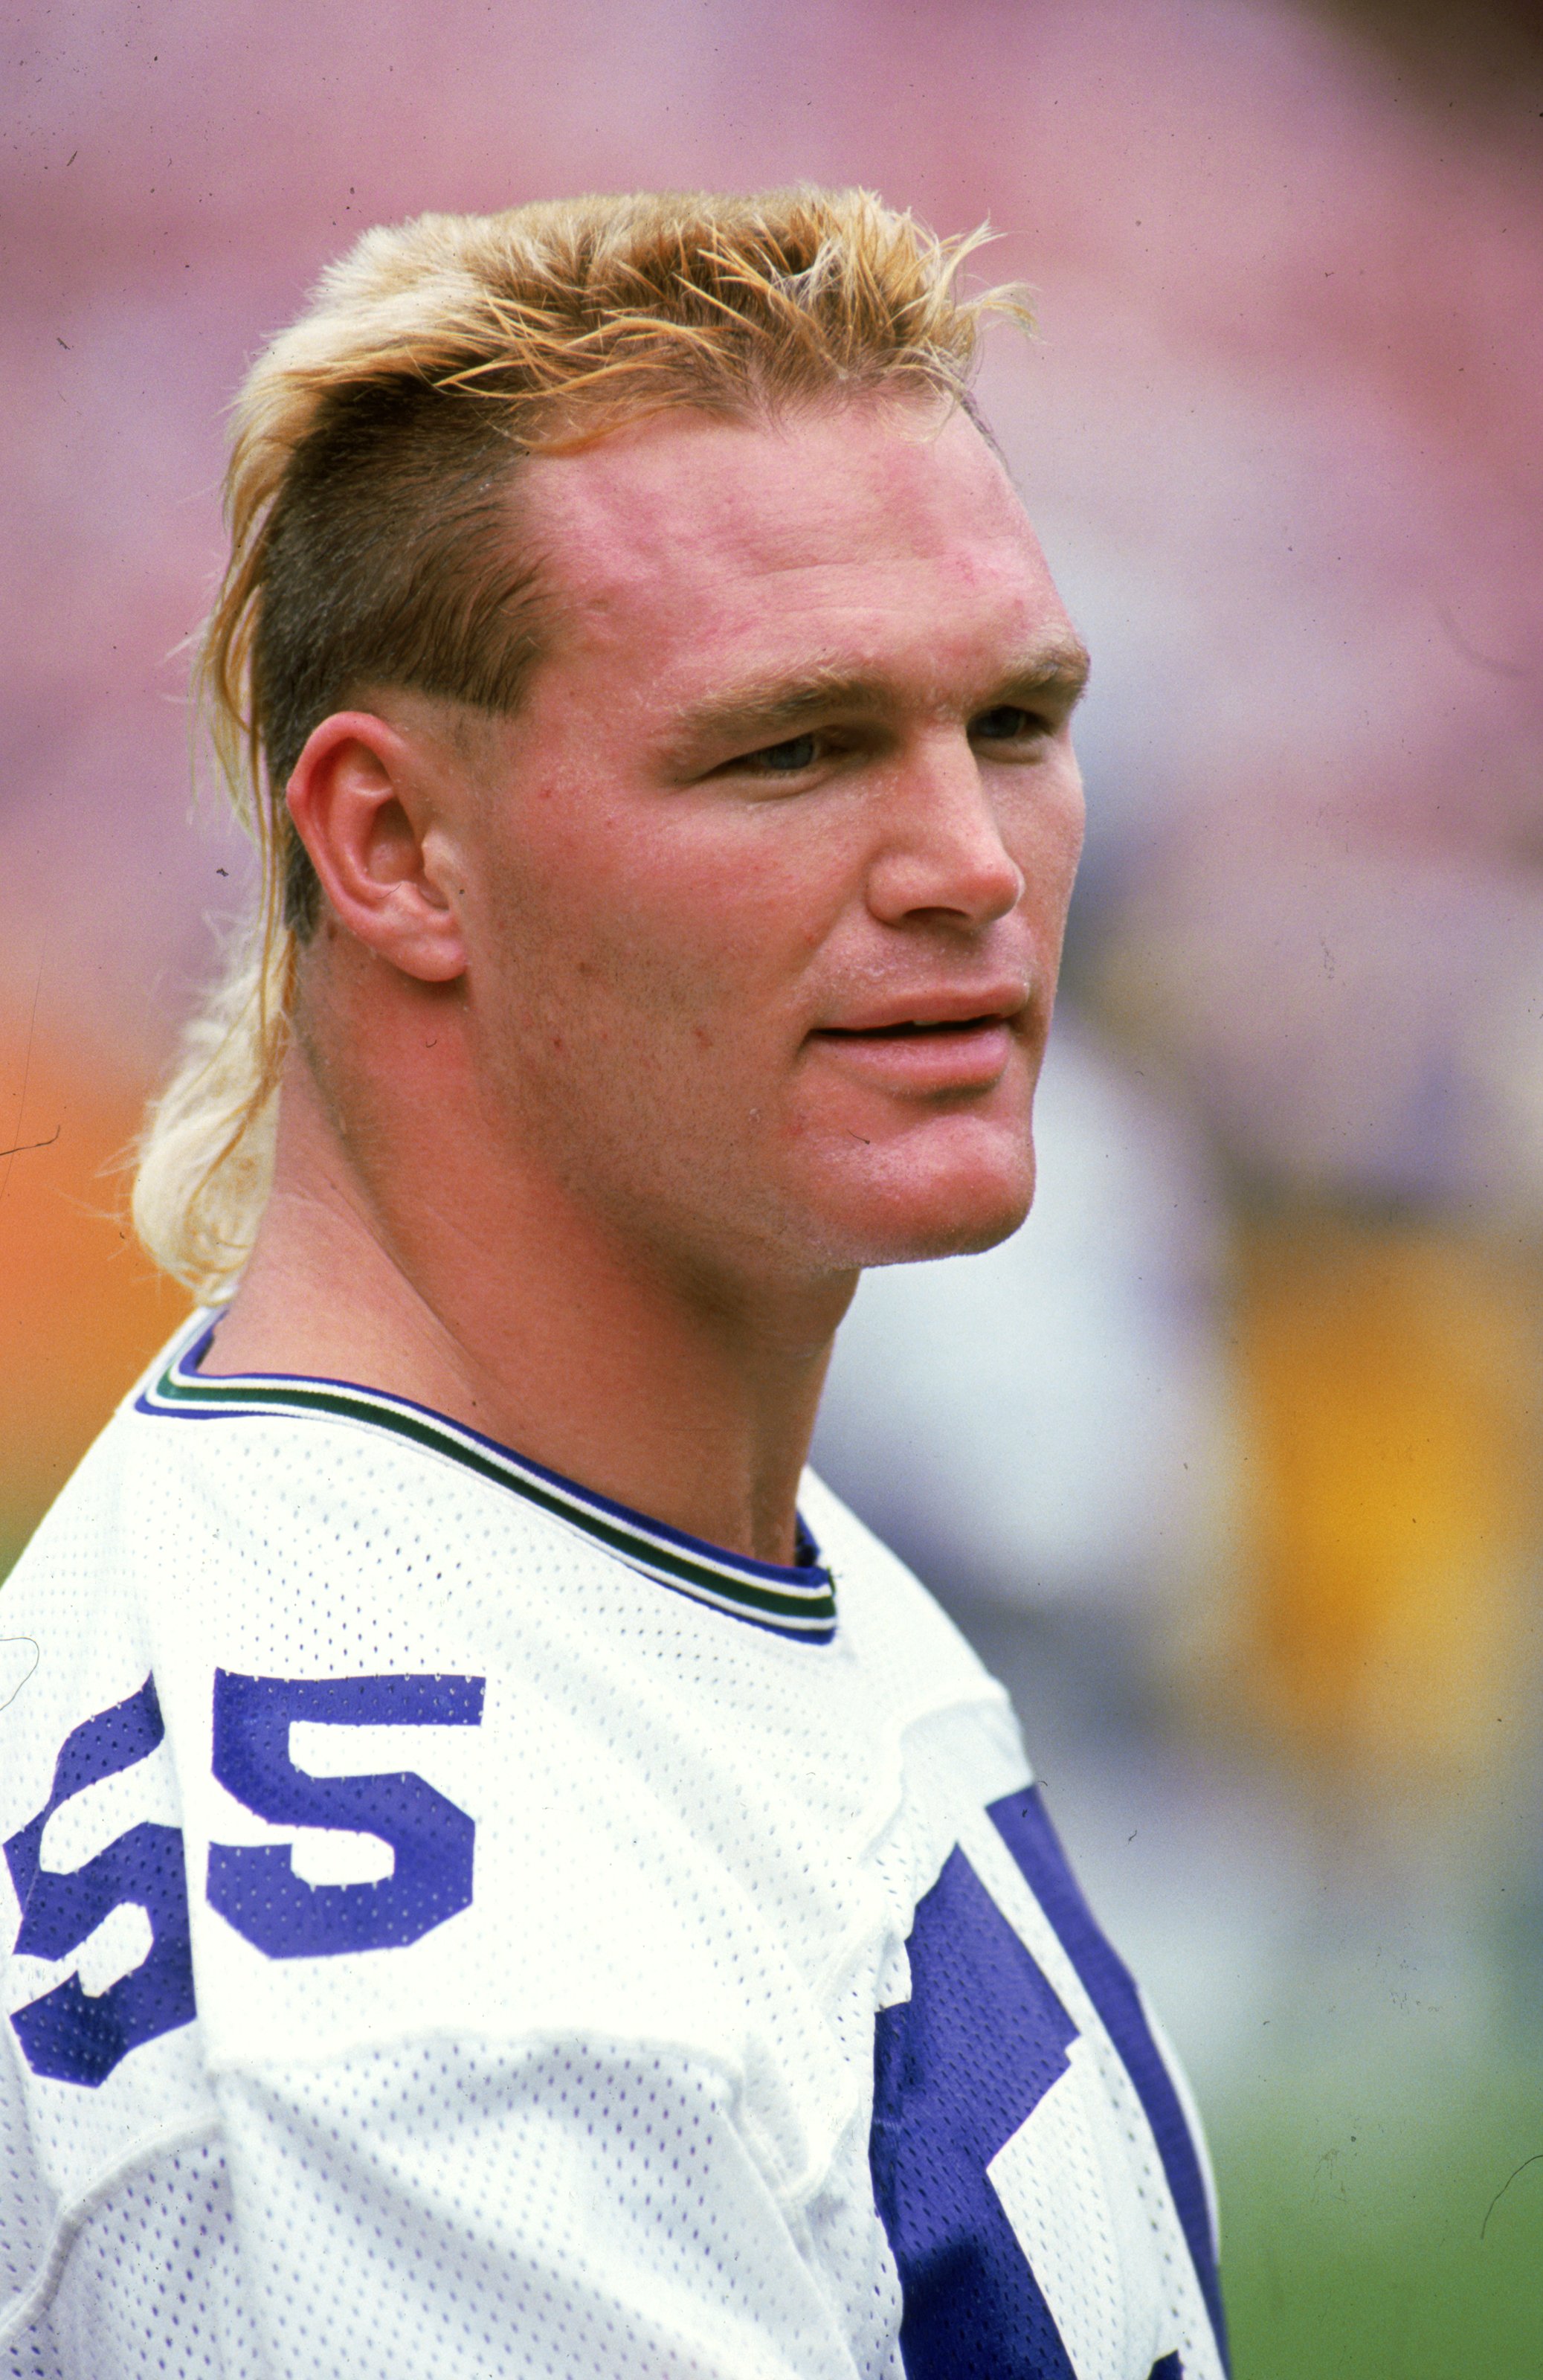 23 Oct 1988: A close up of Brian Bosworth #55 of the Seattle Seahawks as he looks on during the game against the Los Angeles Rams. The Rams defeated the Seahawks 31-10.